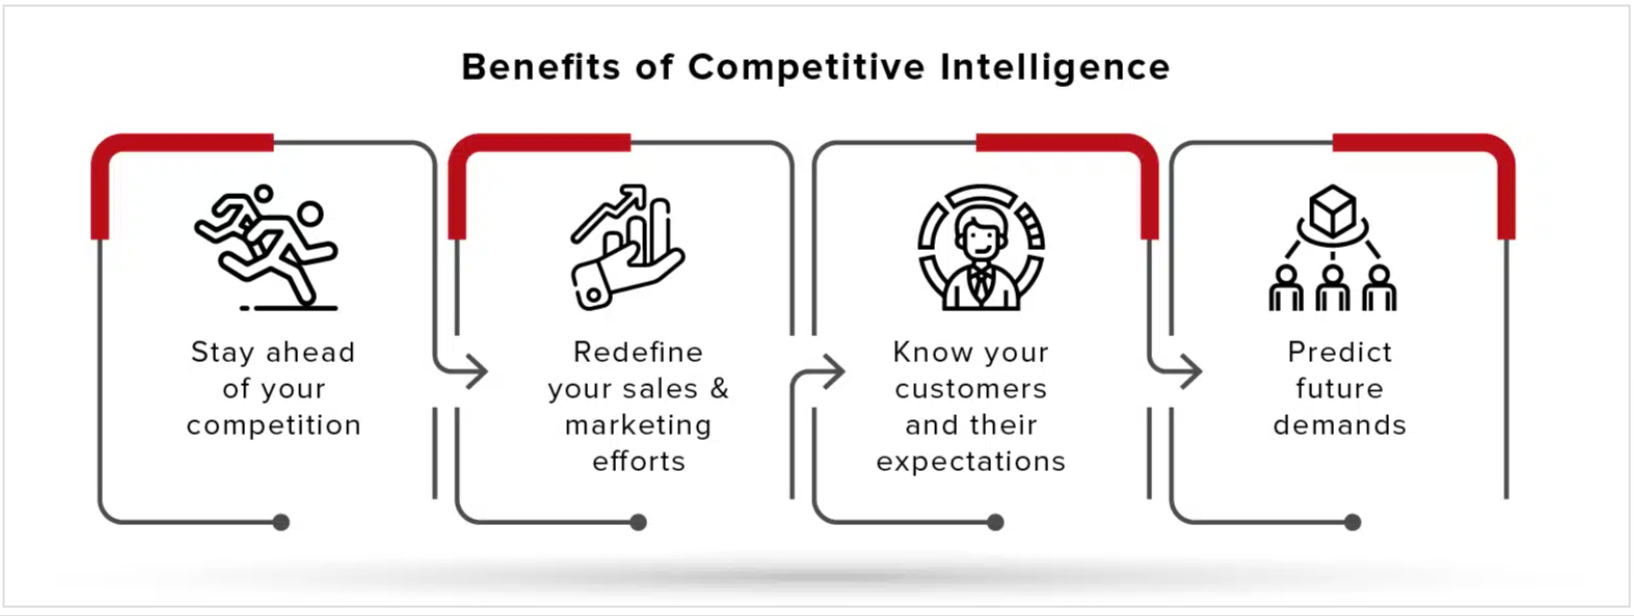 Benefits-of-Competitive-Intelligence-For-Businesses